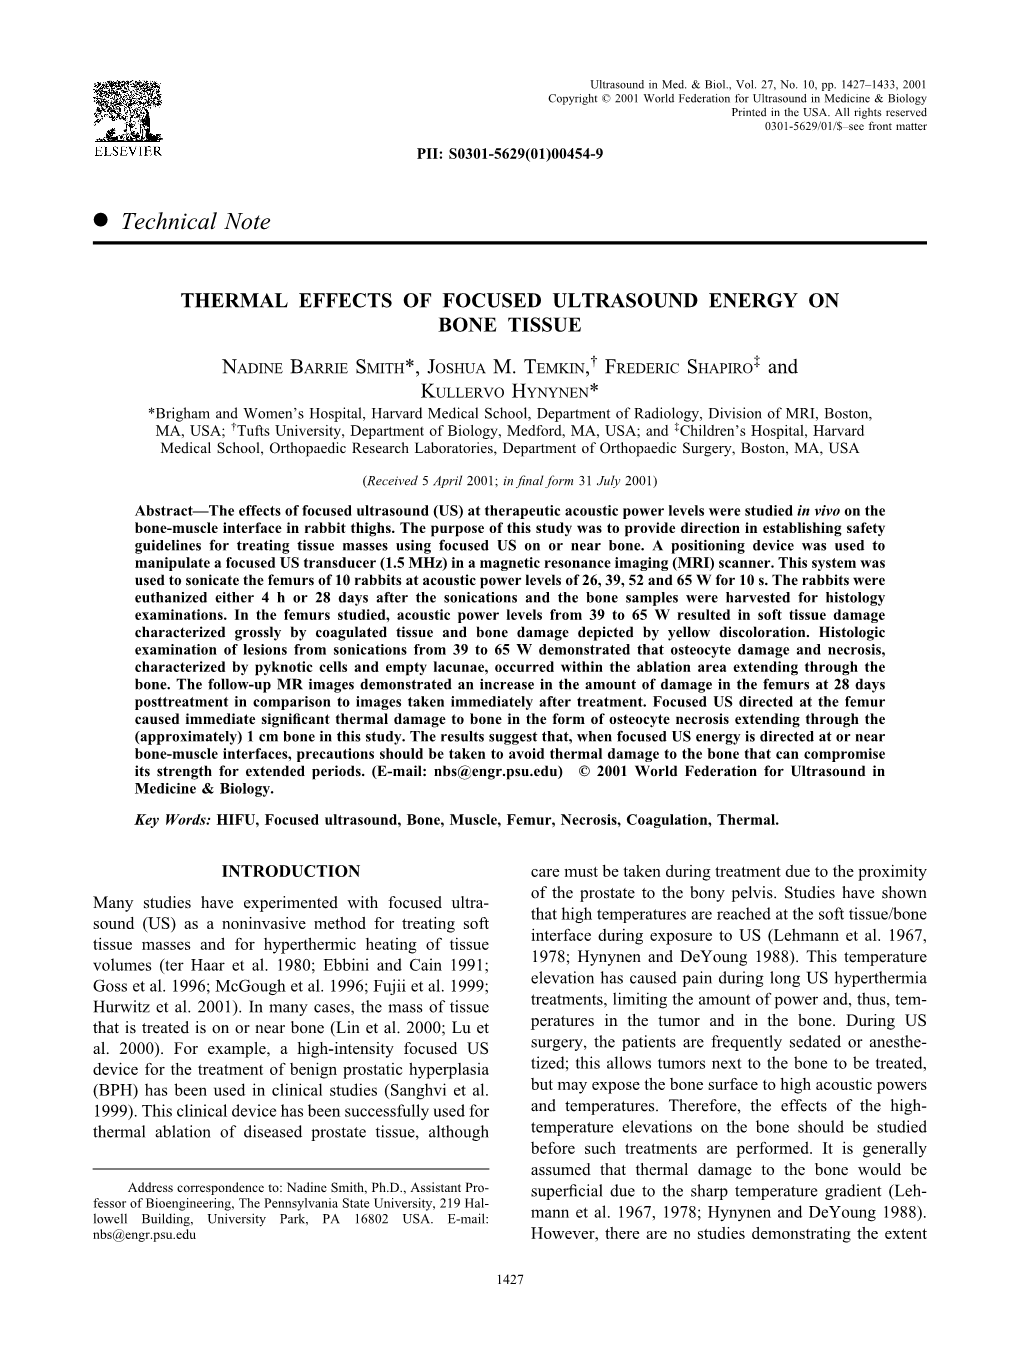 THERMAL EFFECTS of FOCUSED ULTRASOUND ENERGY ON.Pdf